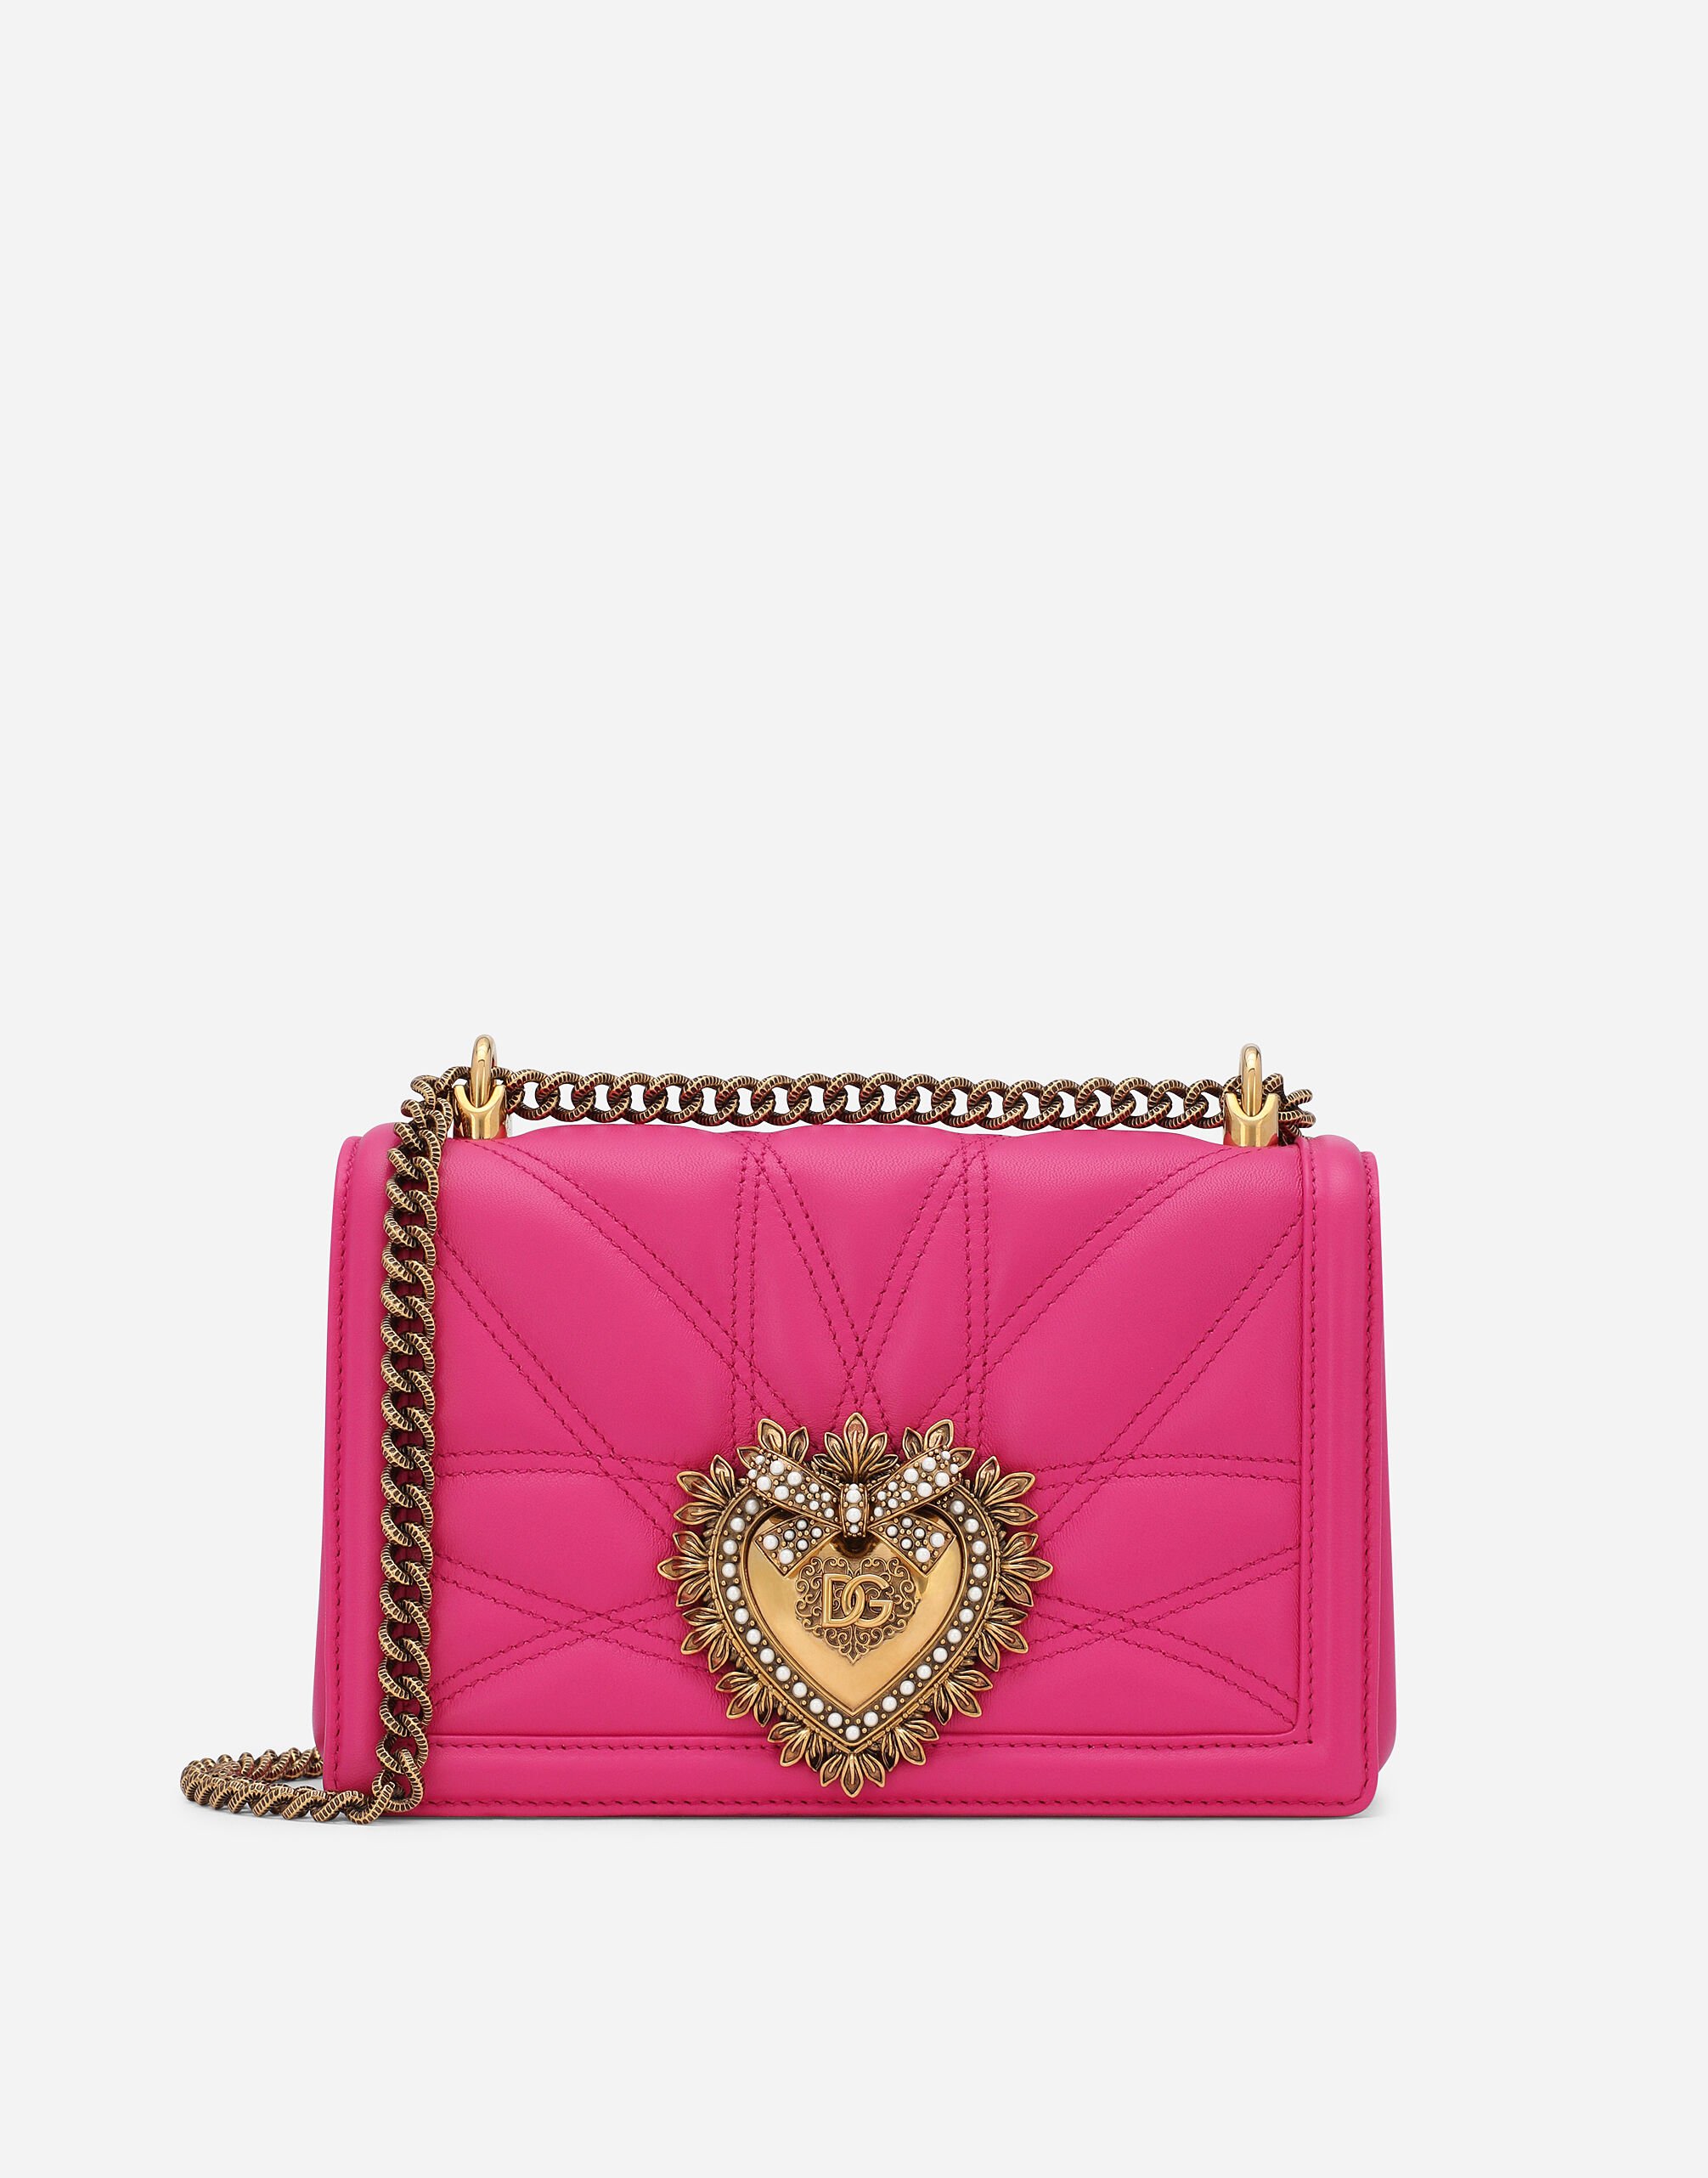 Dolce & Gabbana Medium Devotion bag in quilted nappa leather Pink BB7598AW576